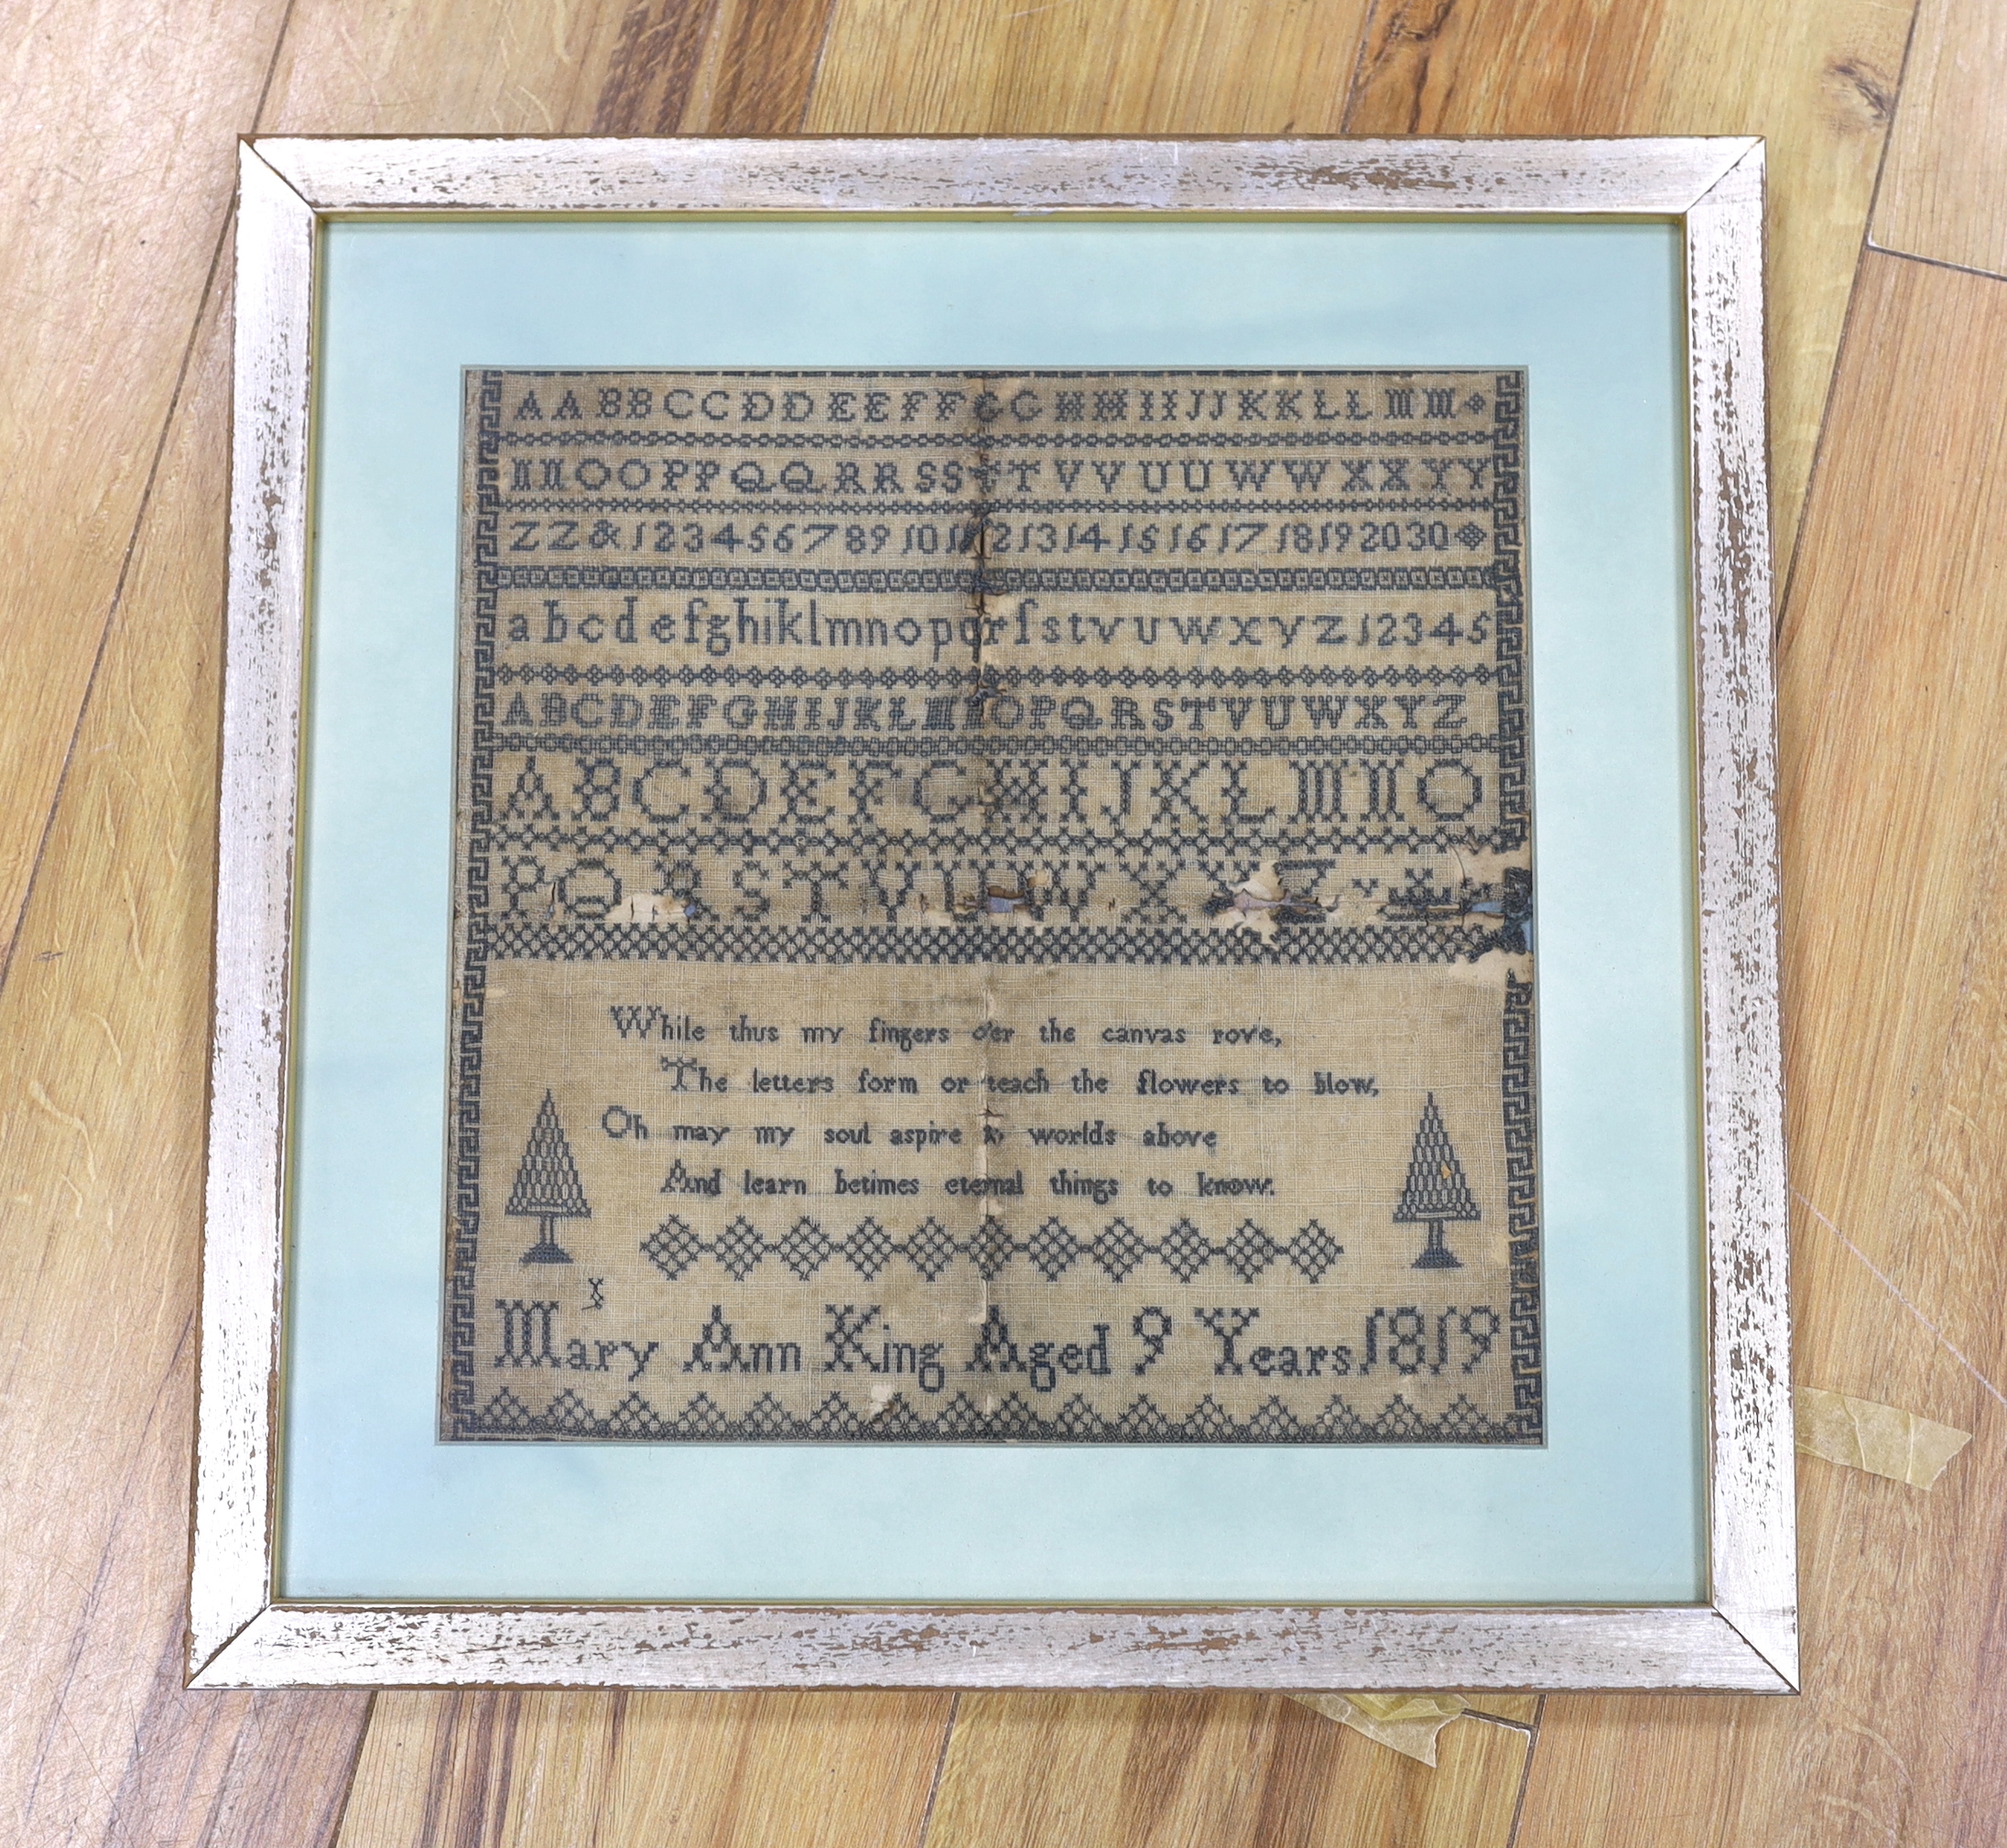 An early 19th century alphabet sampler with verse, worked by Mary Ann King, aged 9, 1819, 31 x 31cm                                                                                                                         